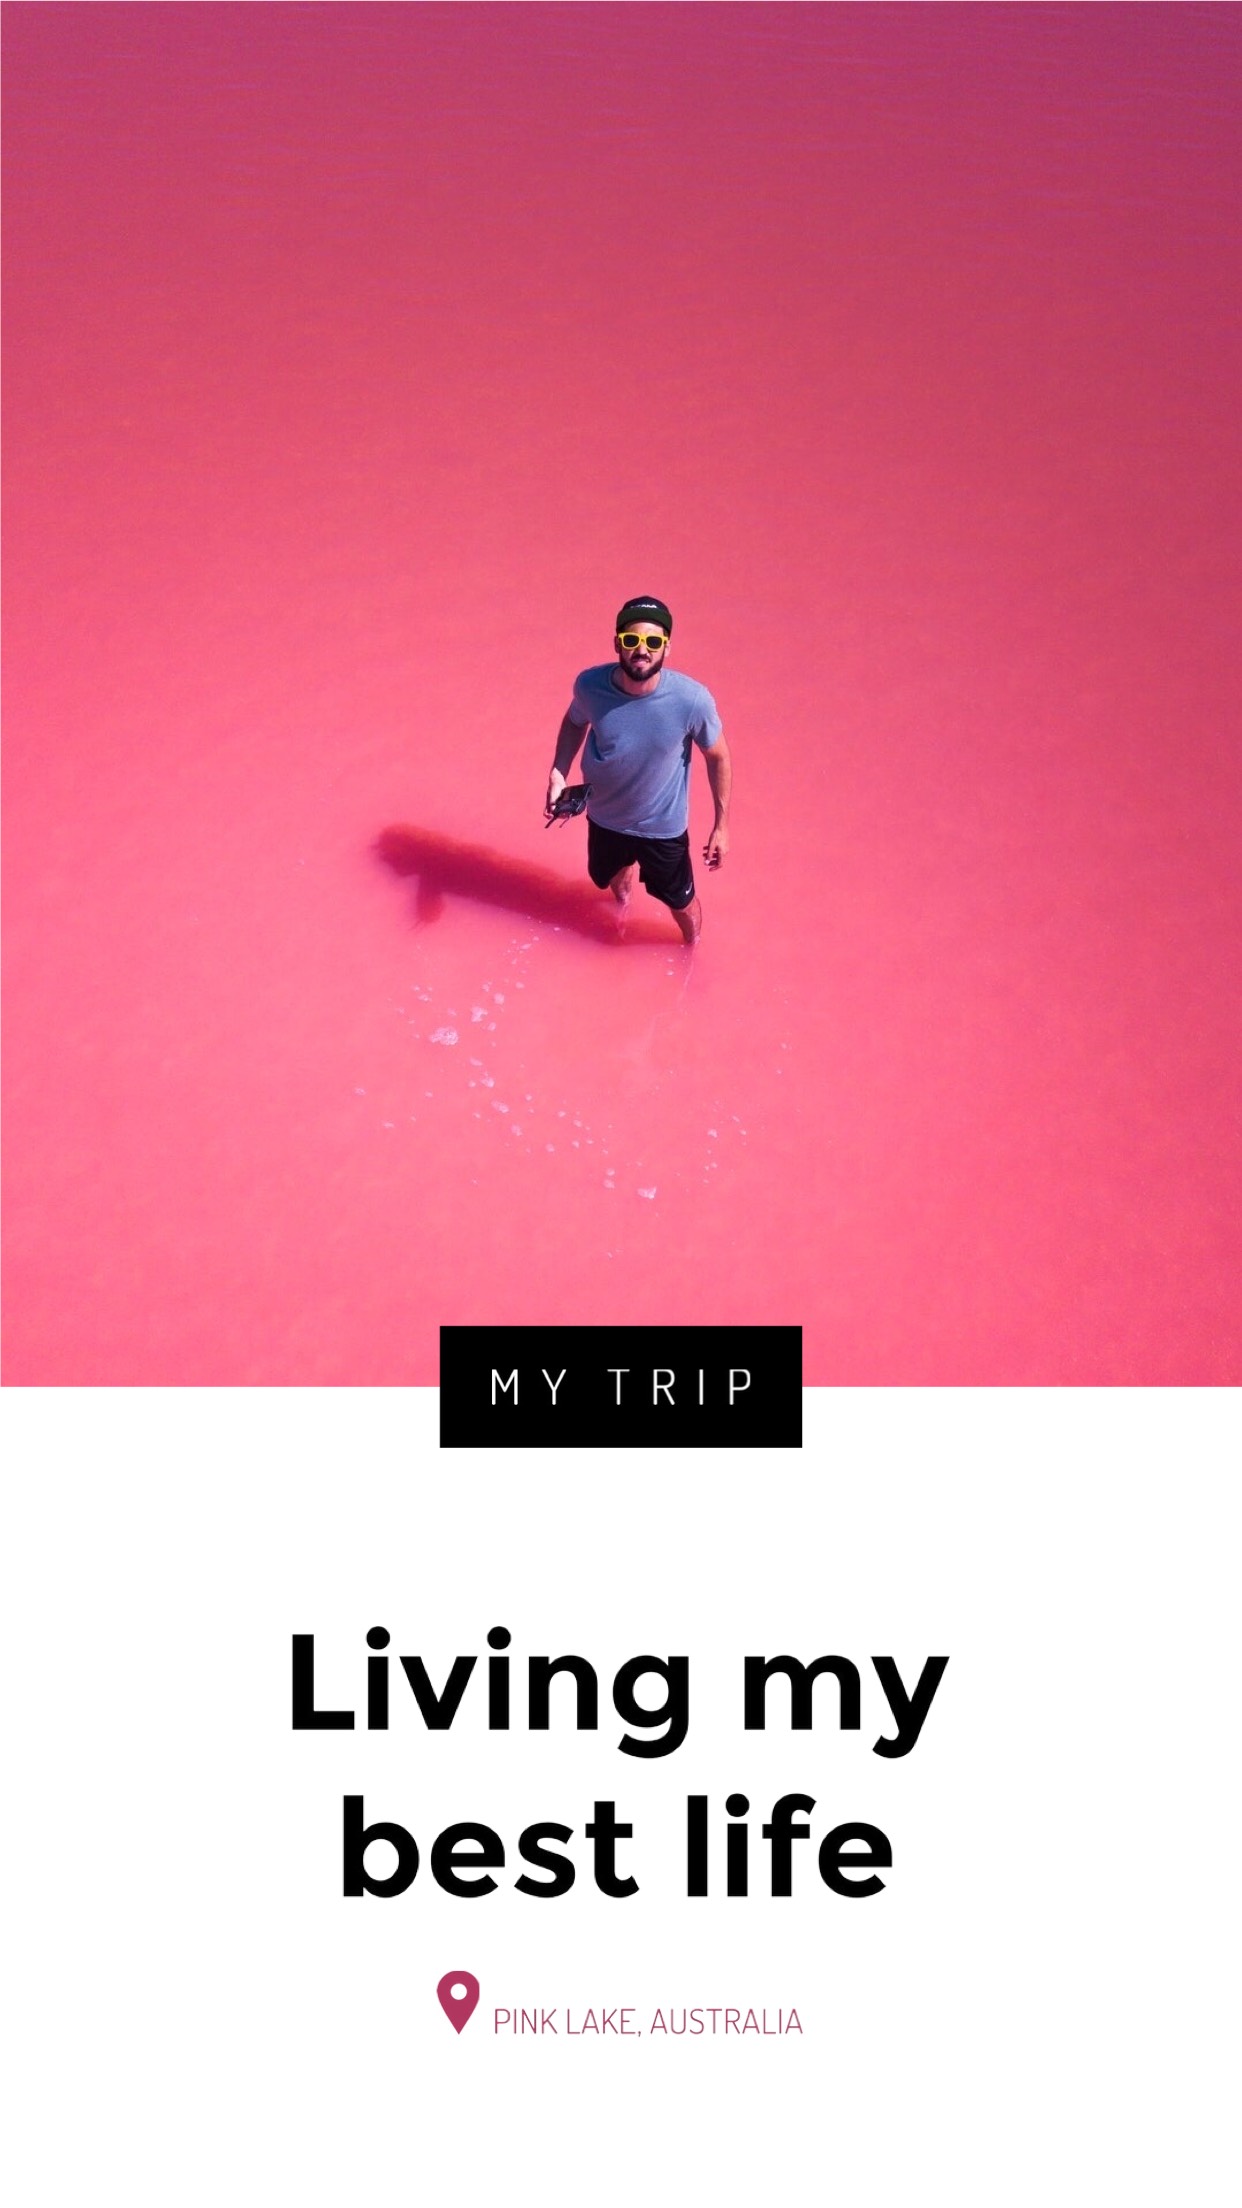 Man in pink lake "living my best life" Classy template